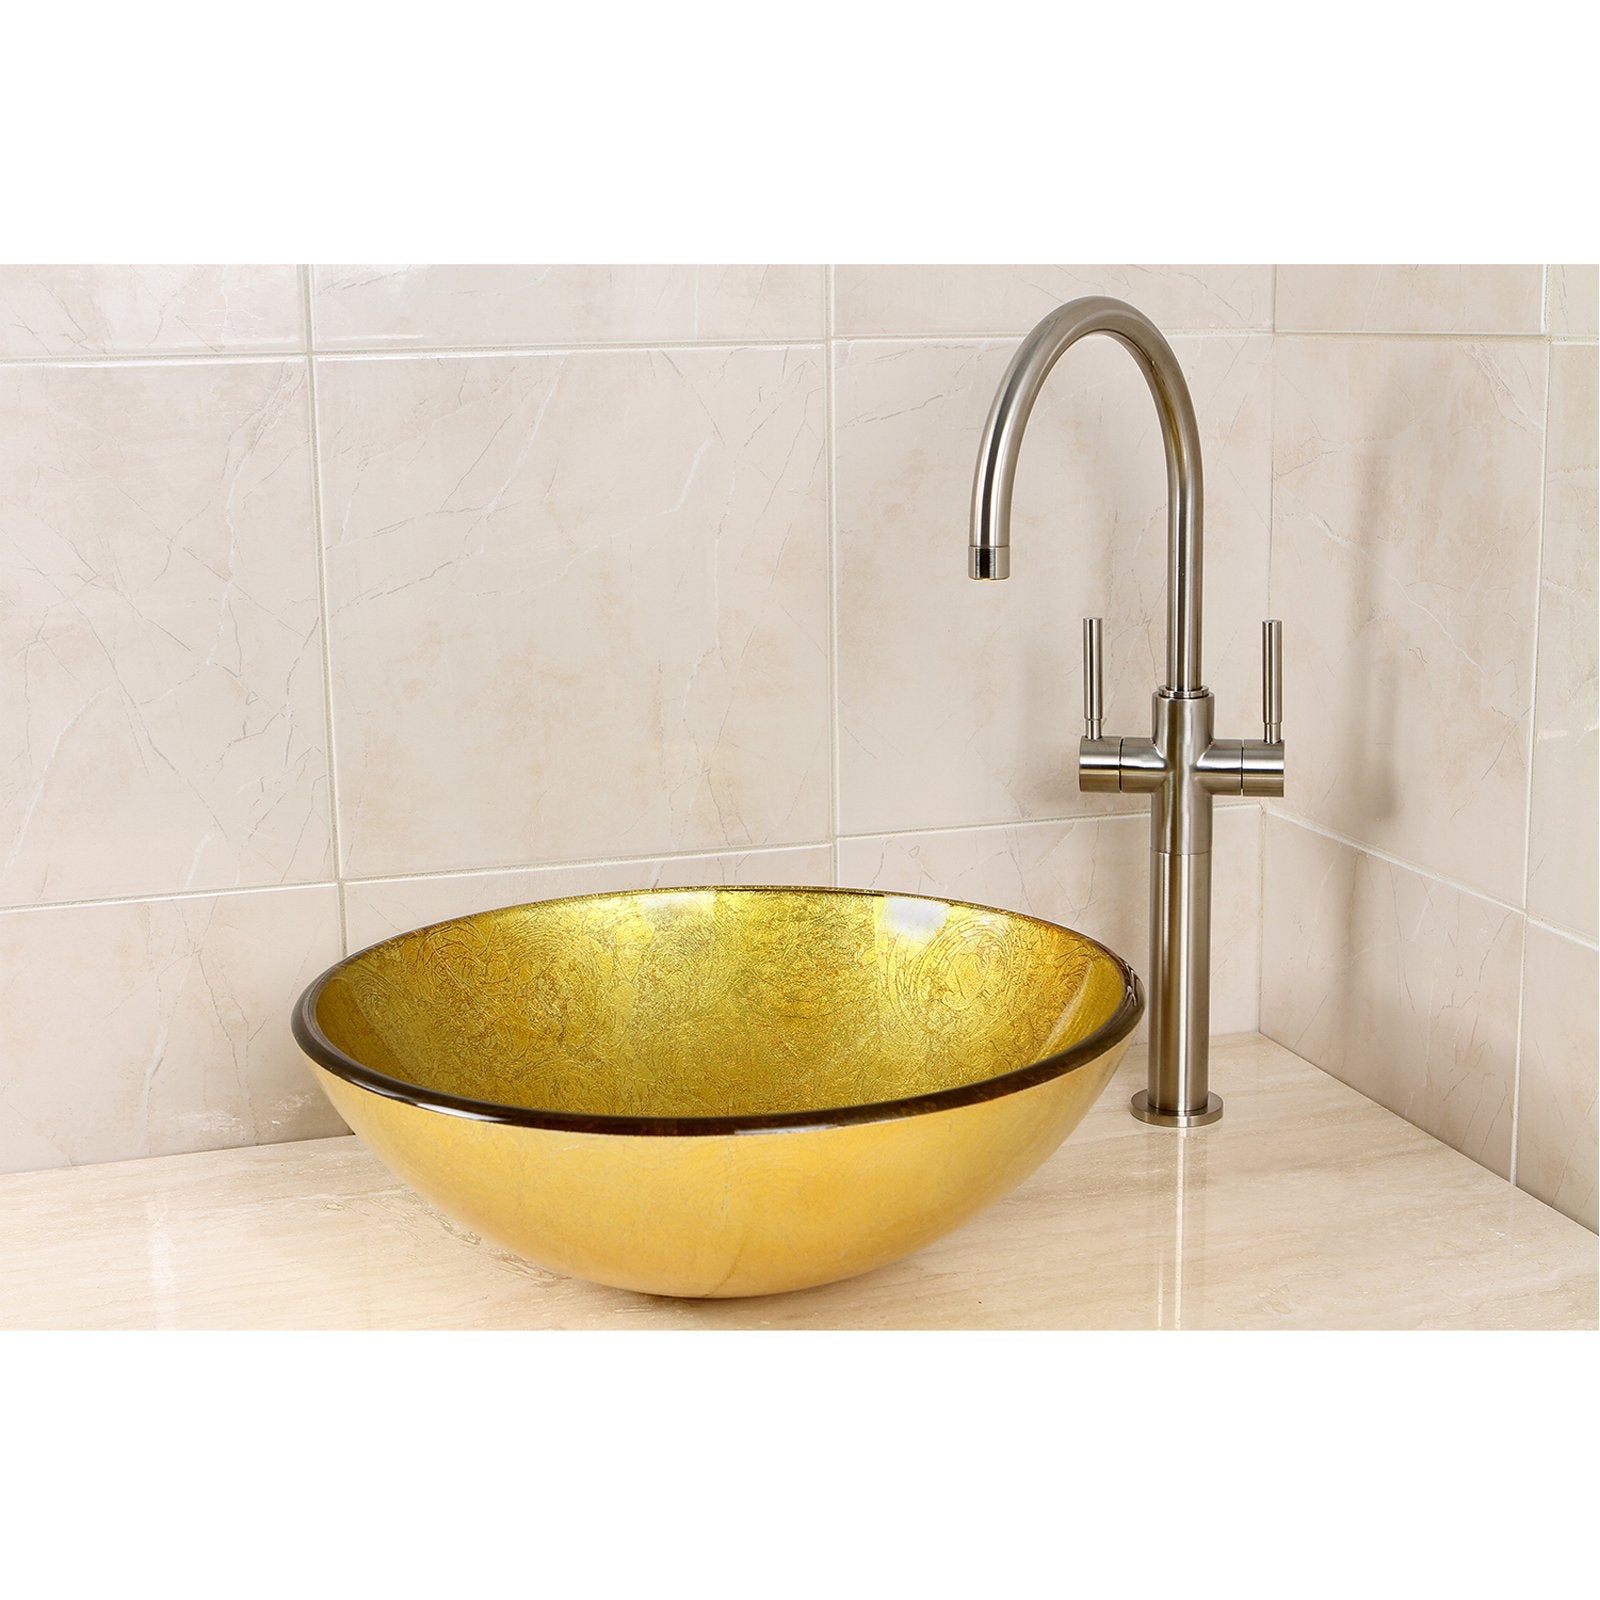 Kingston Brass Concord Two Handle Vessel Sink Faucet-Bathroom Faucets-Free Shipping-Directsinks.